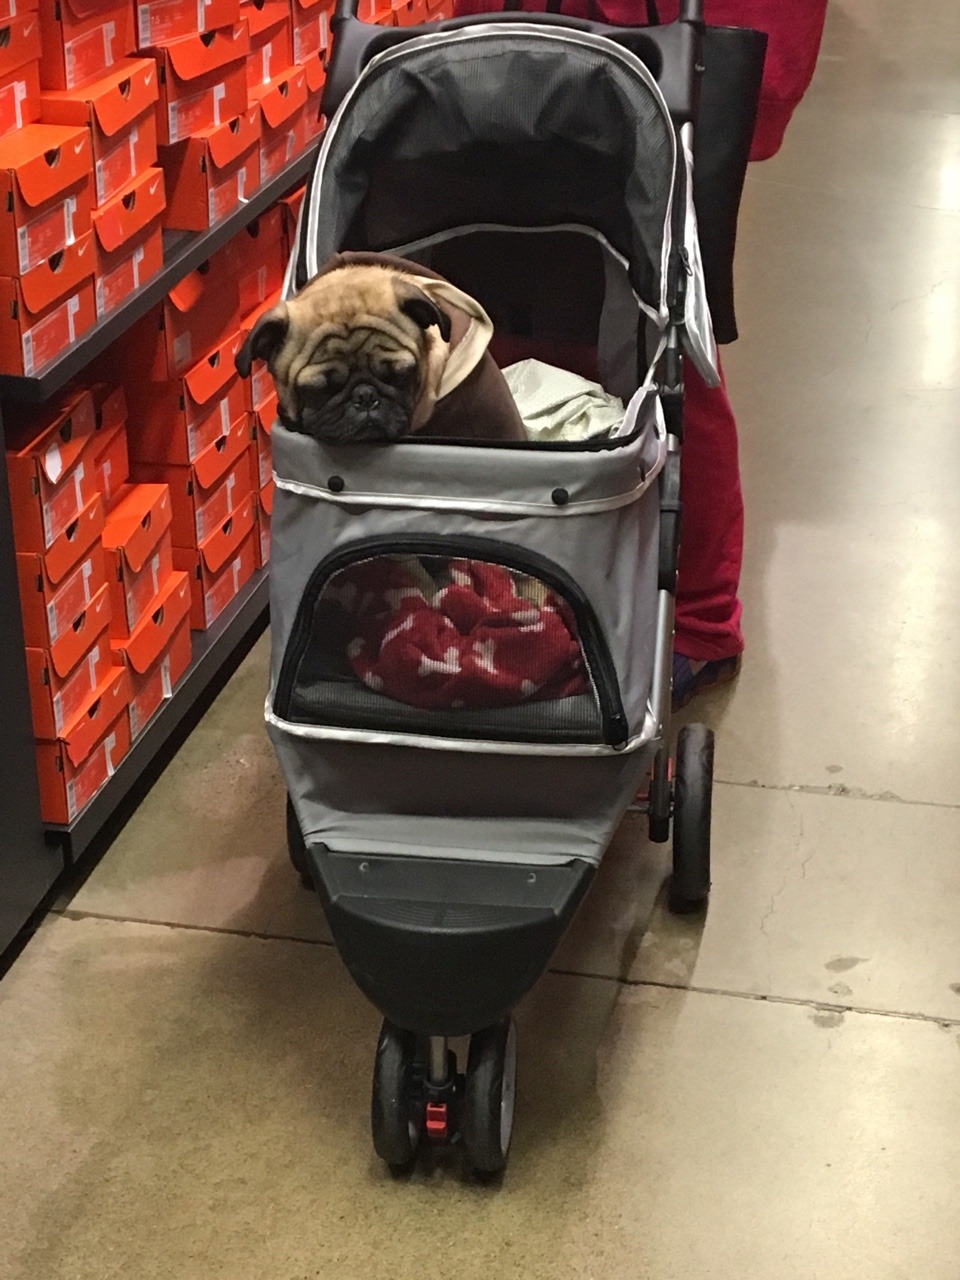 Alex Alex Alex! I saw this puggo in a sweater in a stiller at the Nike store!!!!This